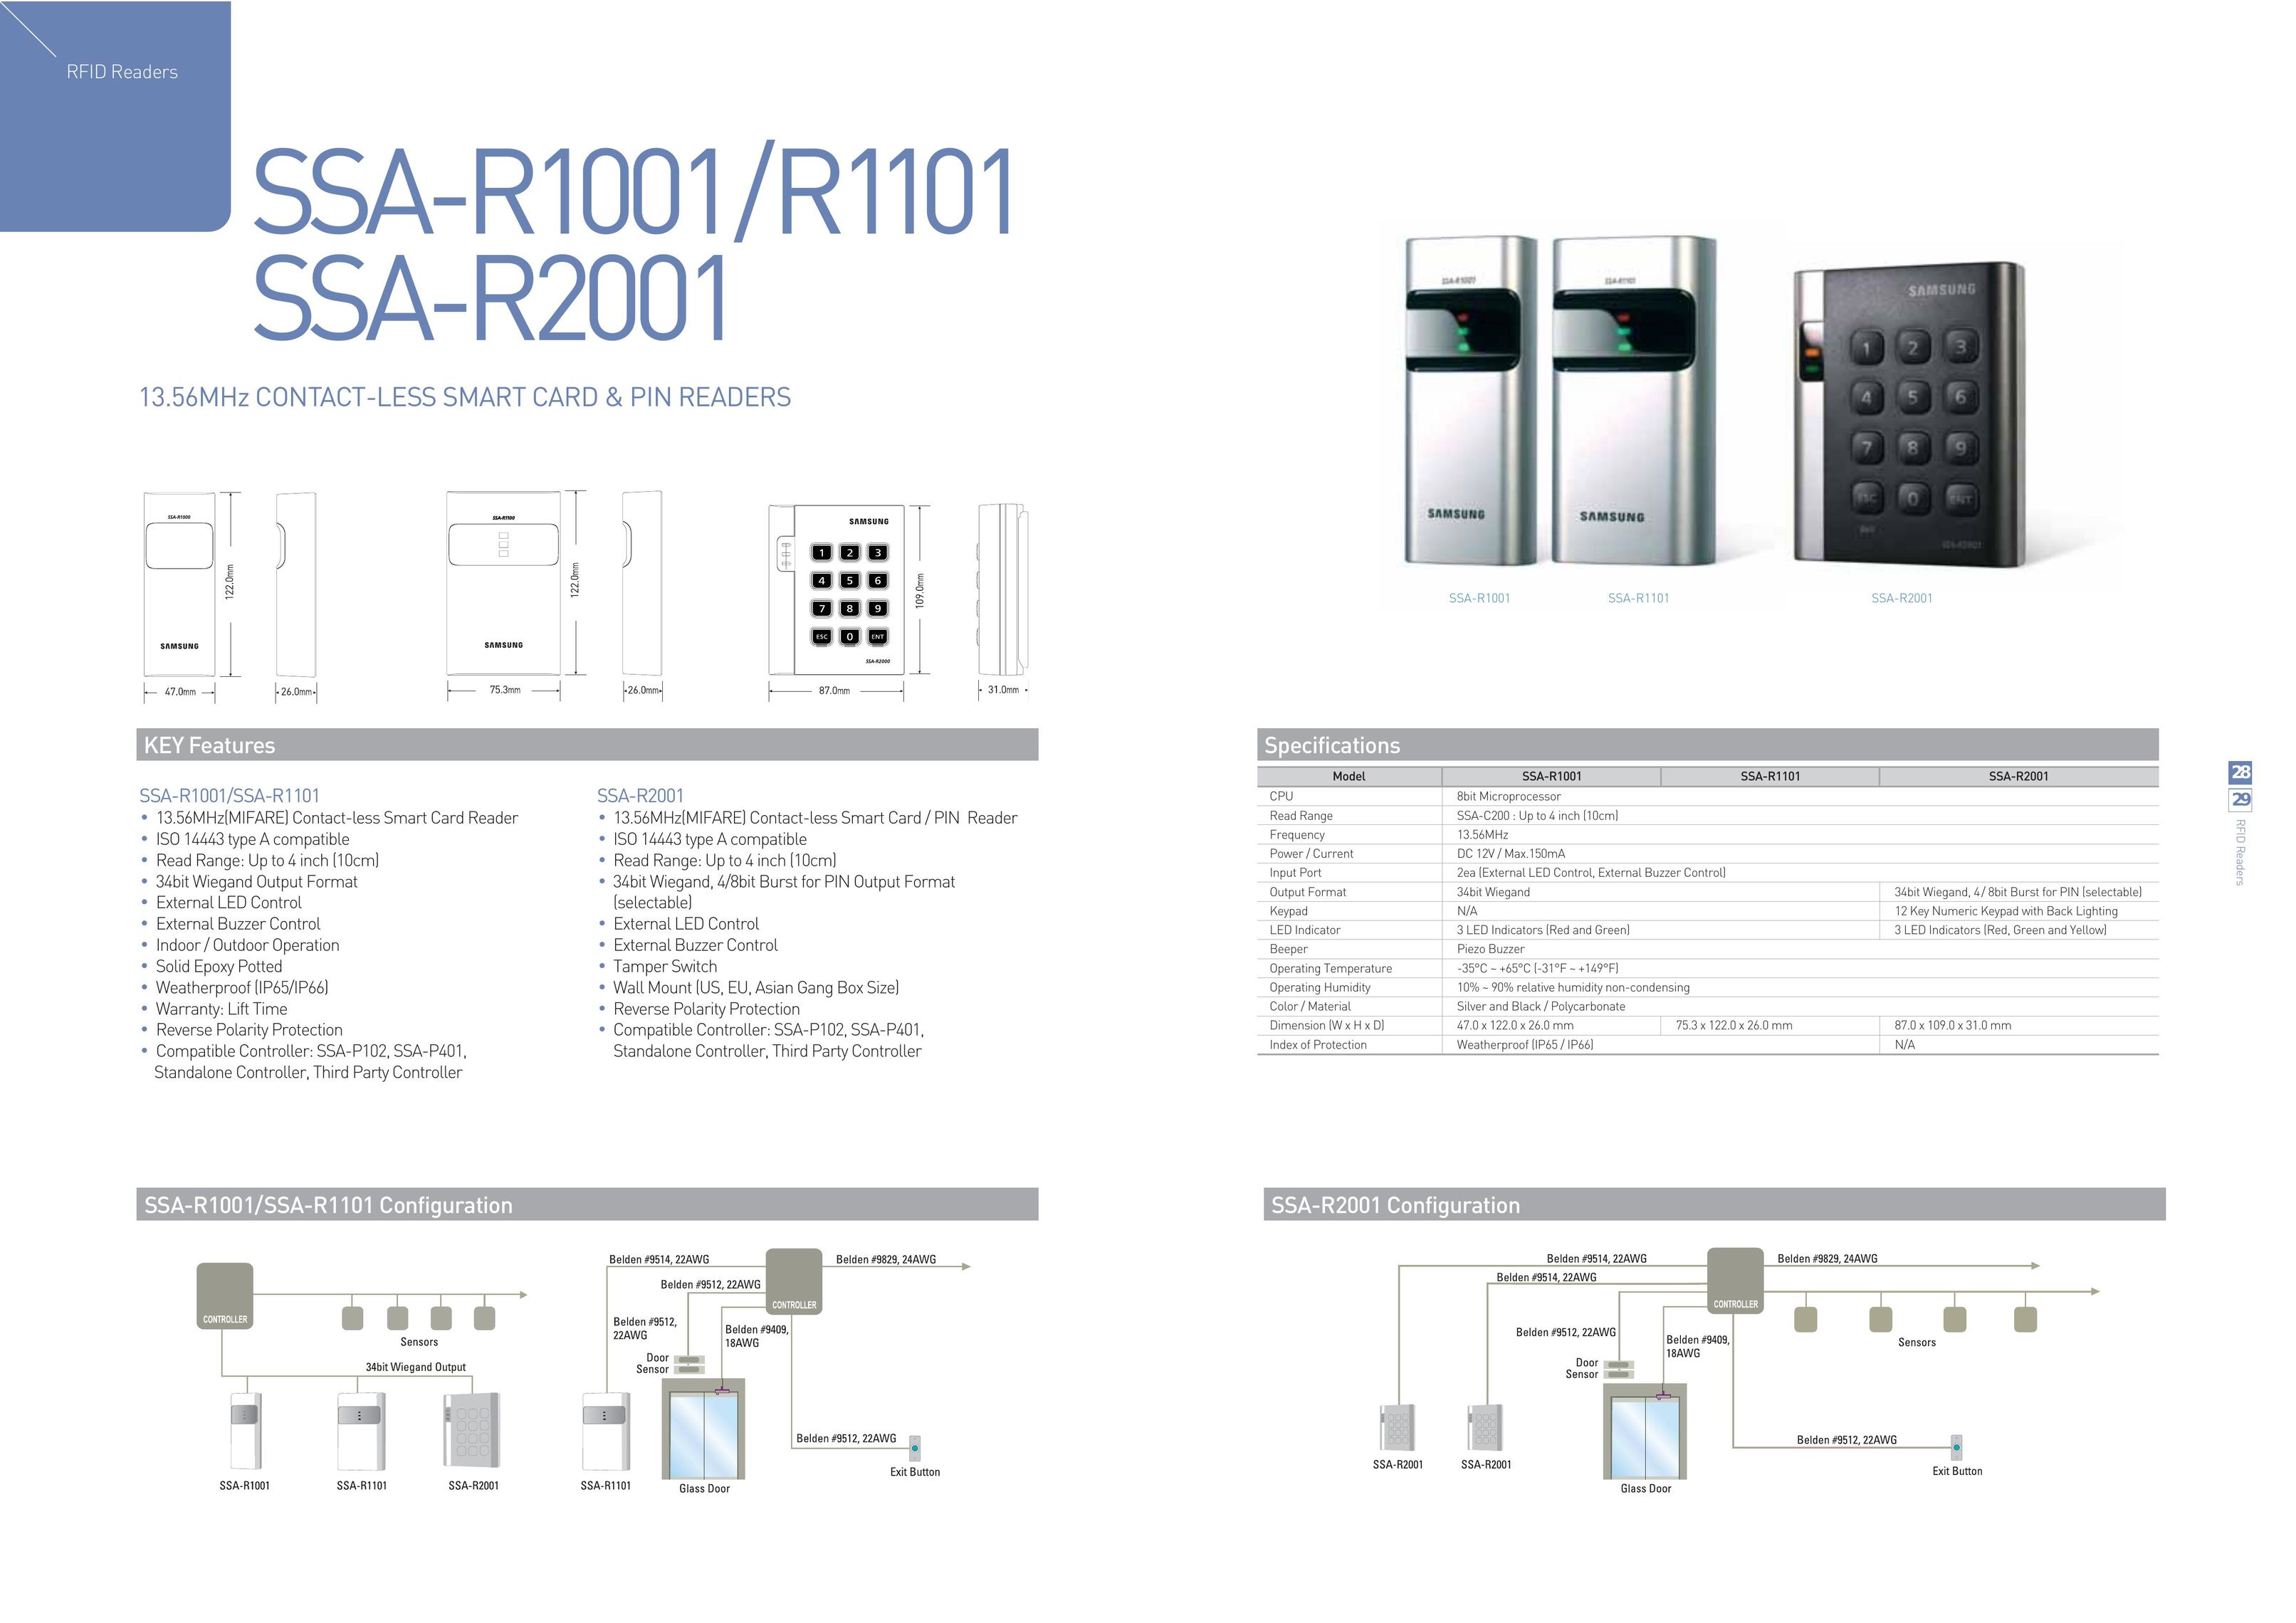 Samsung SSA-R1101 Home Security System User Manual